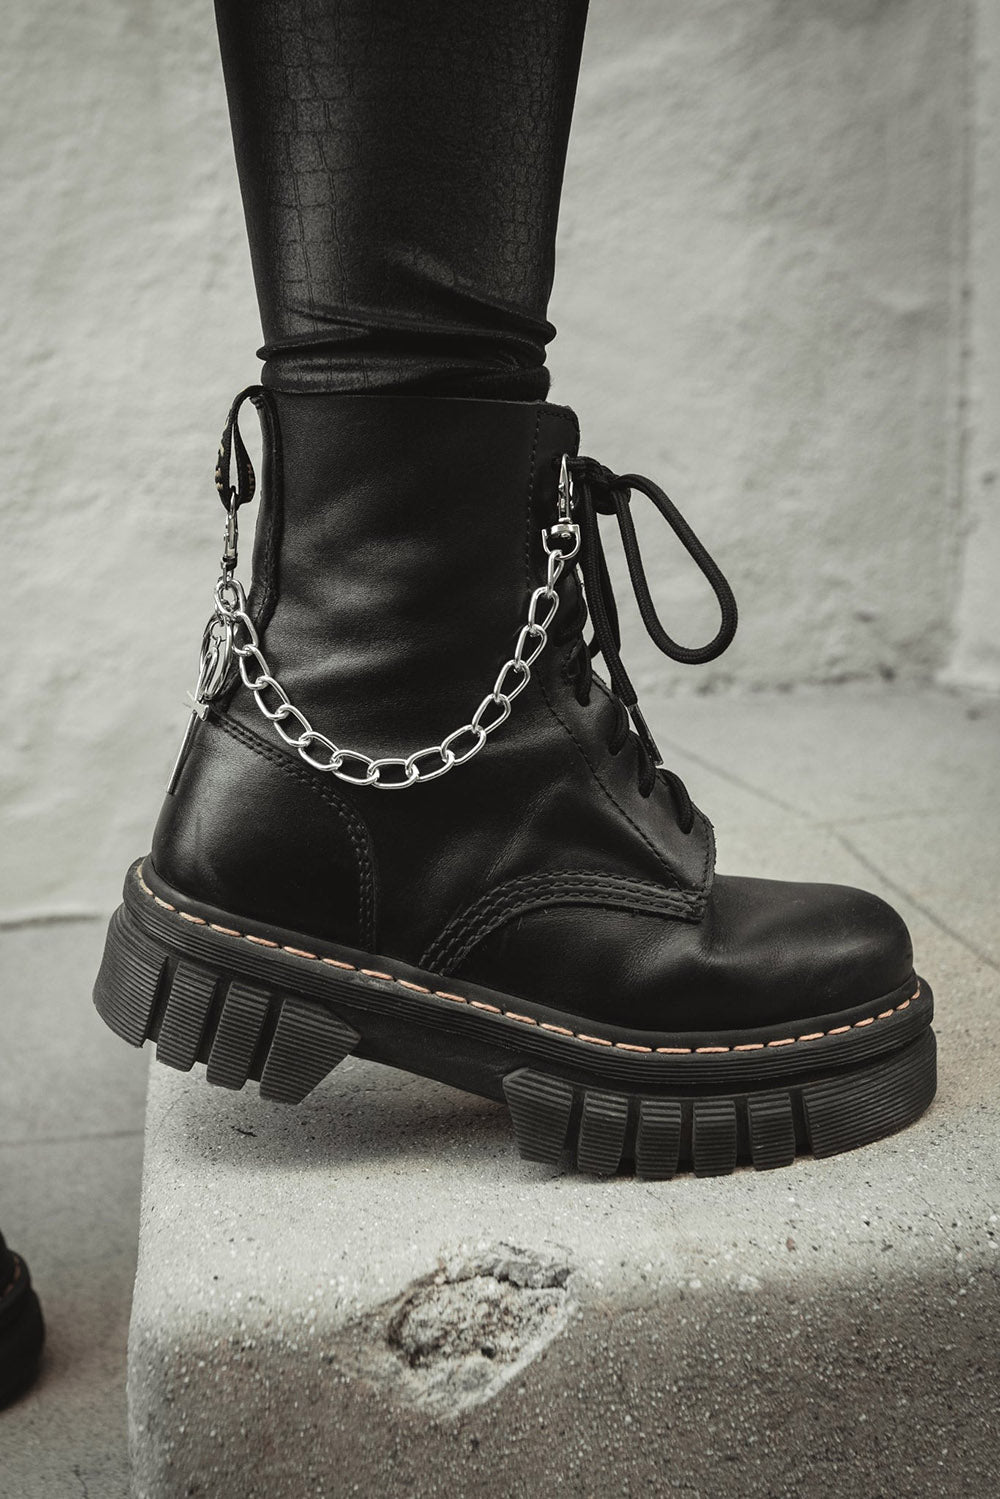 heavy metal chain for boots